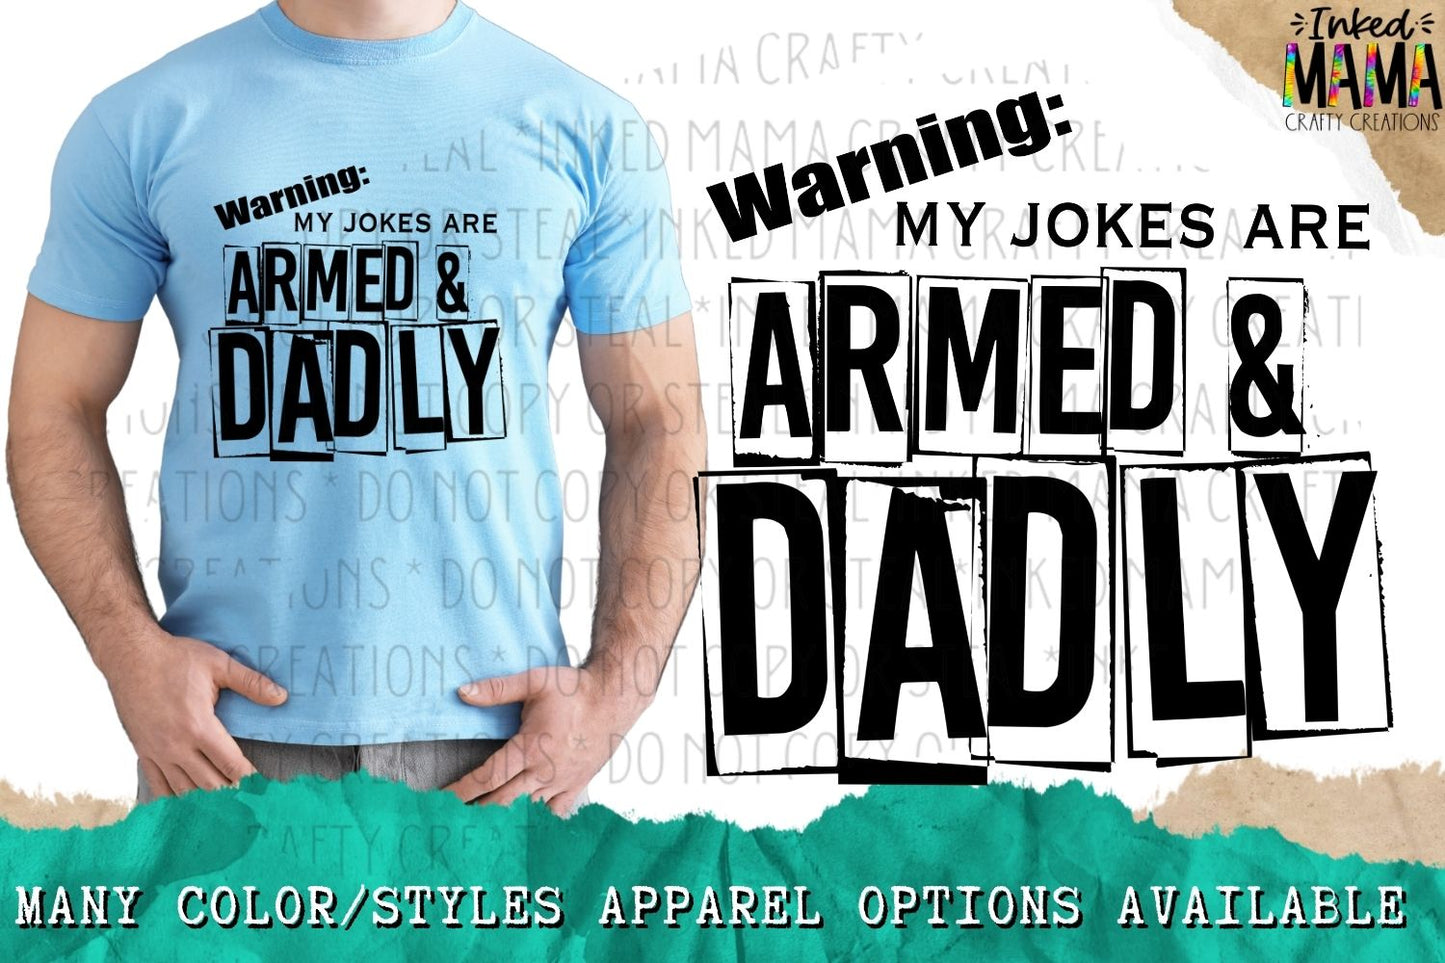 Warning my jokes are armed & Dadly - Apparel